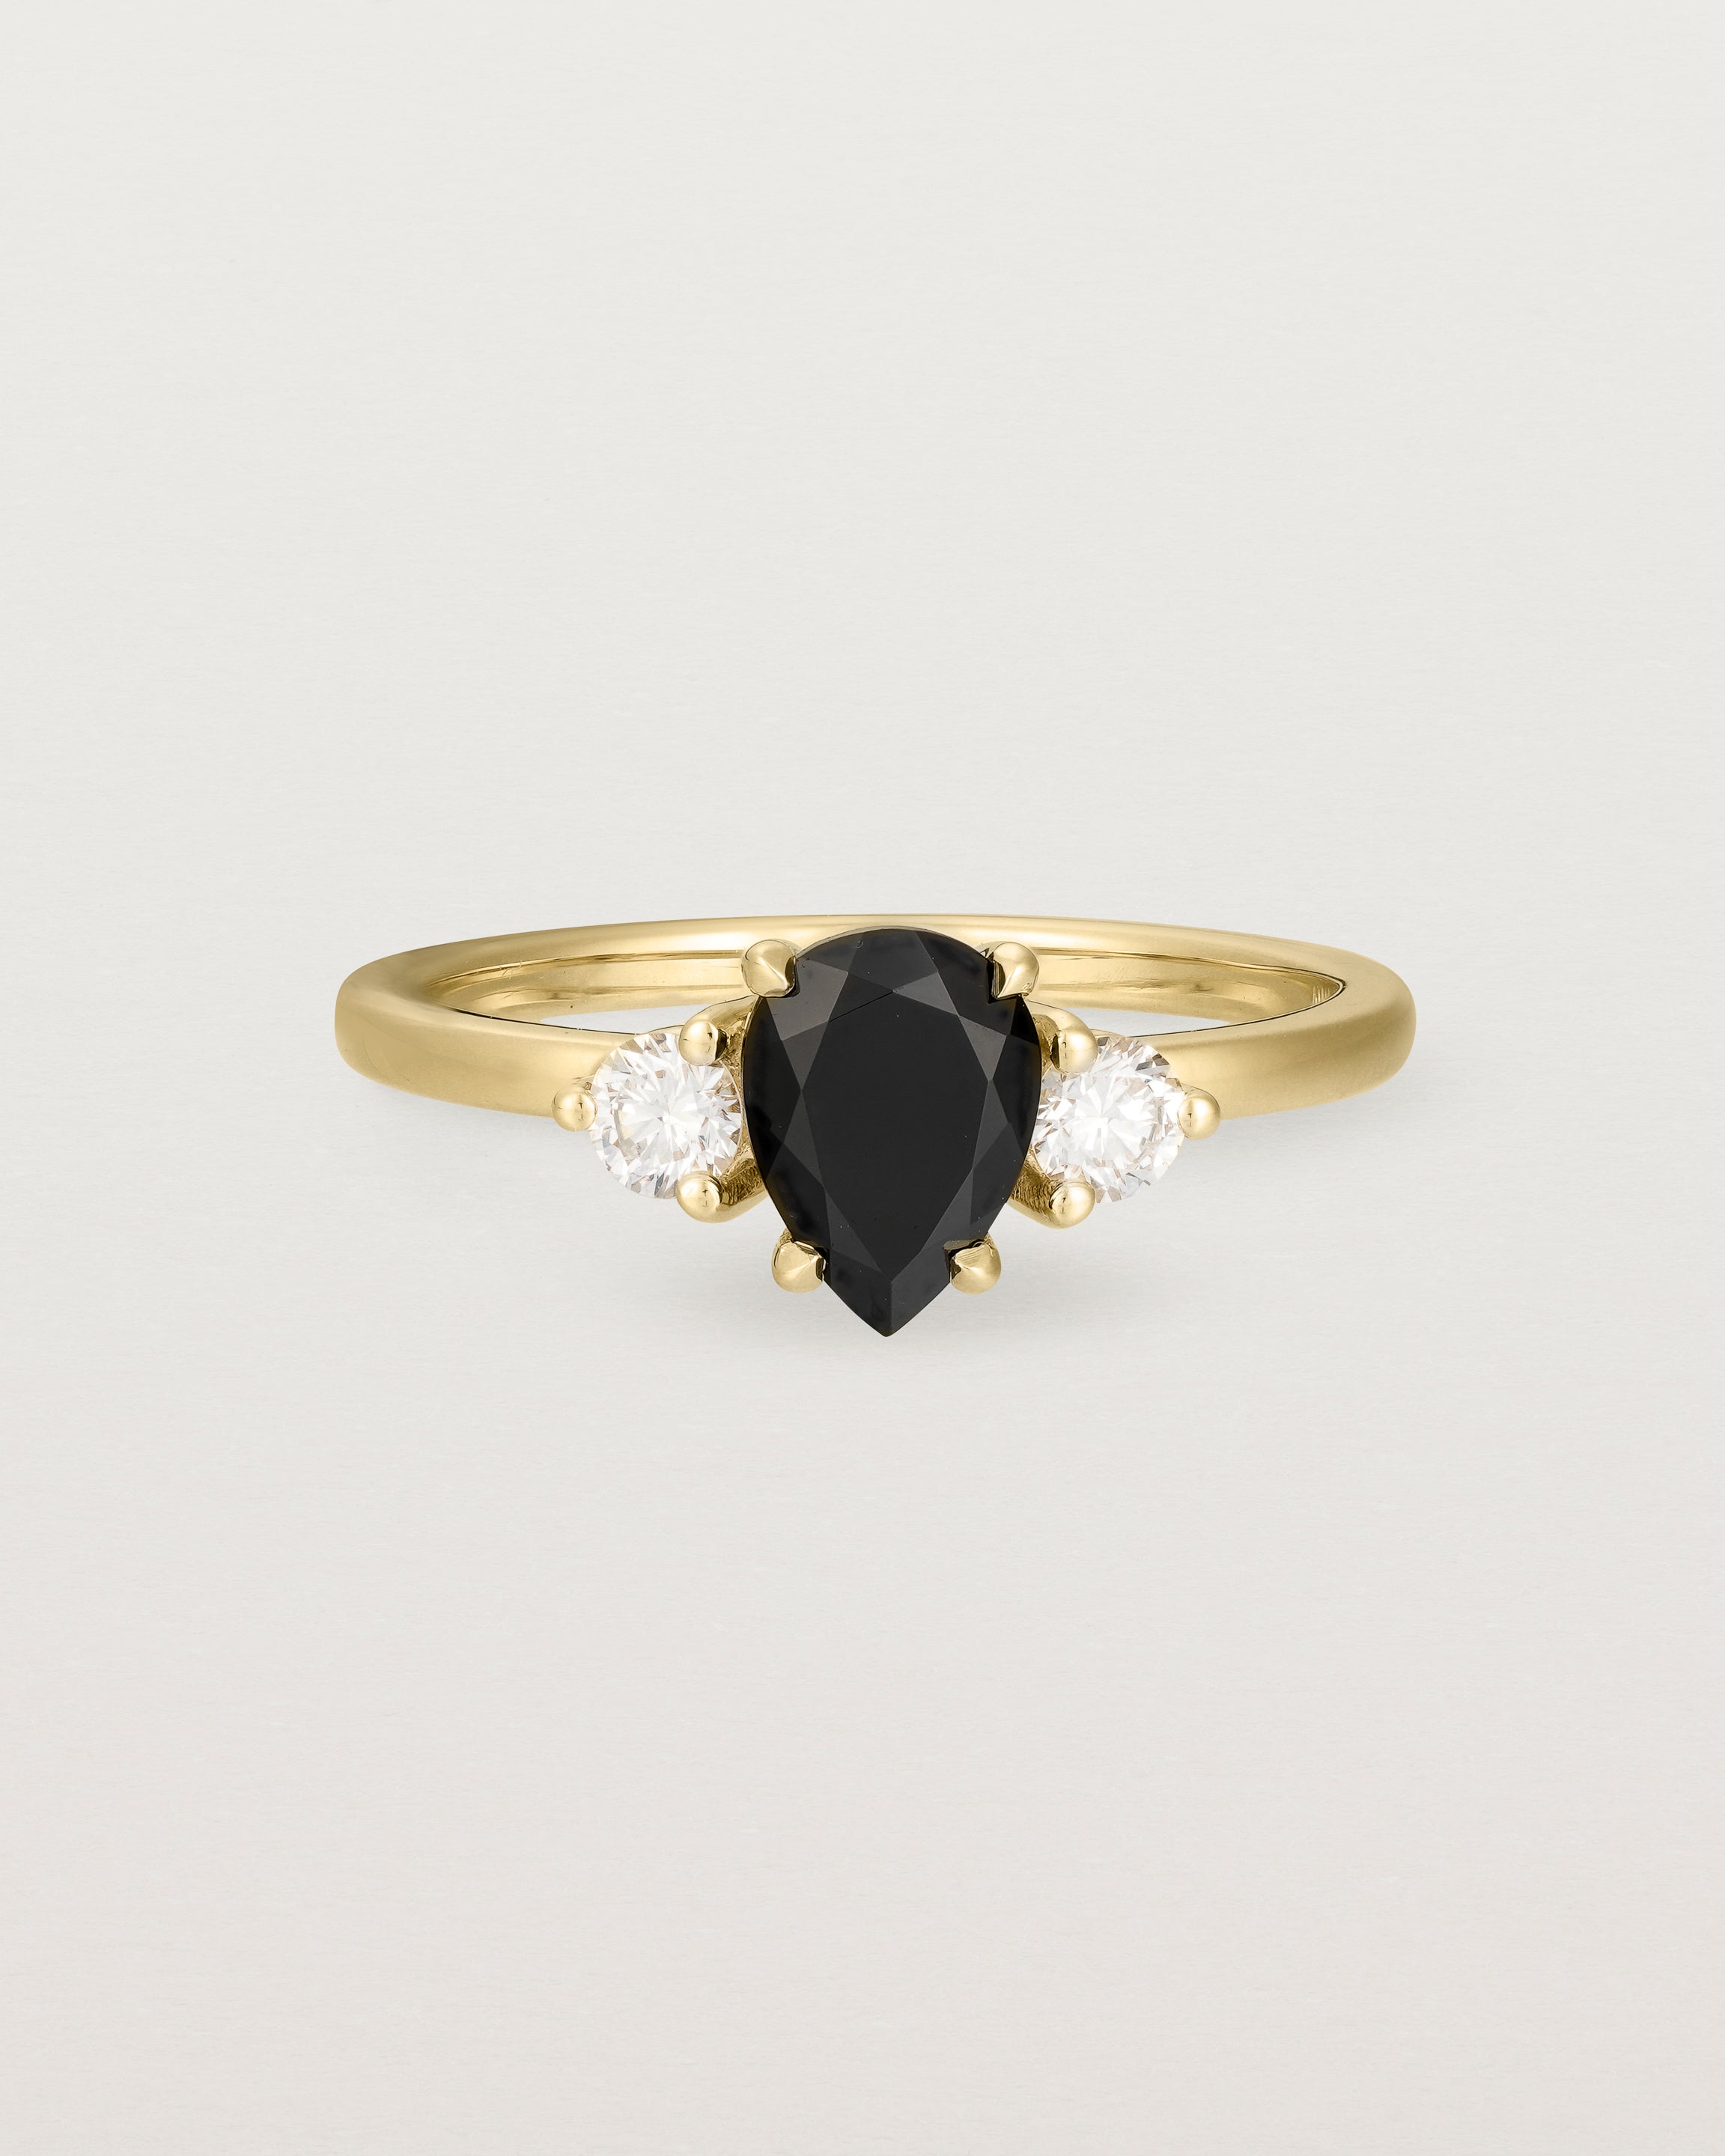 Front view of the Una Pear Trio Ring | Black Spinel & Diamonds | Yellow Gold.